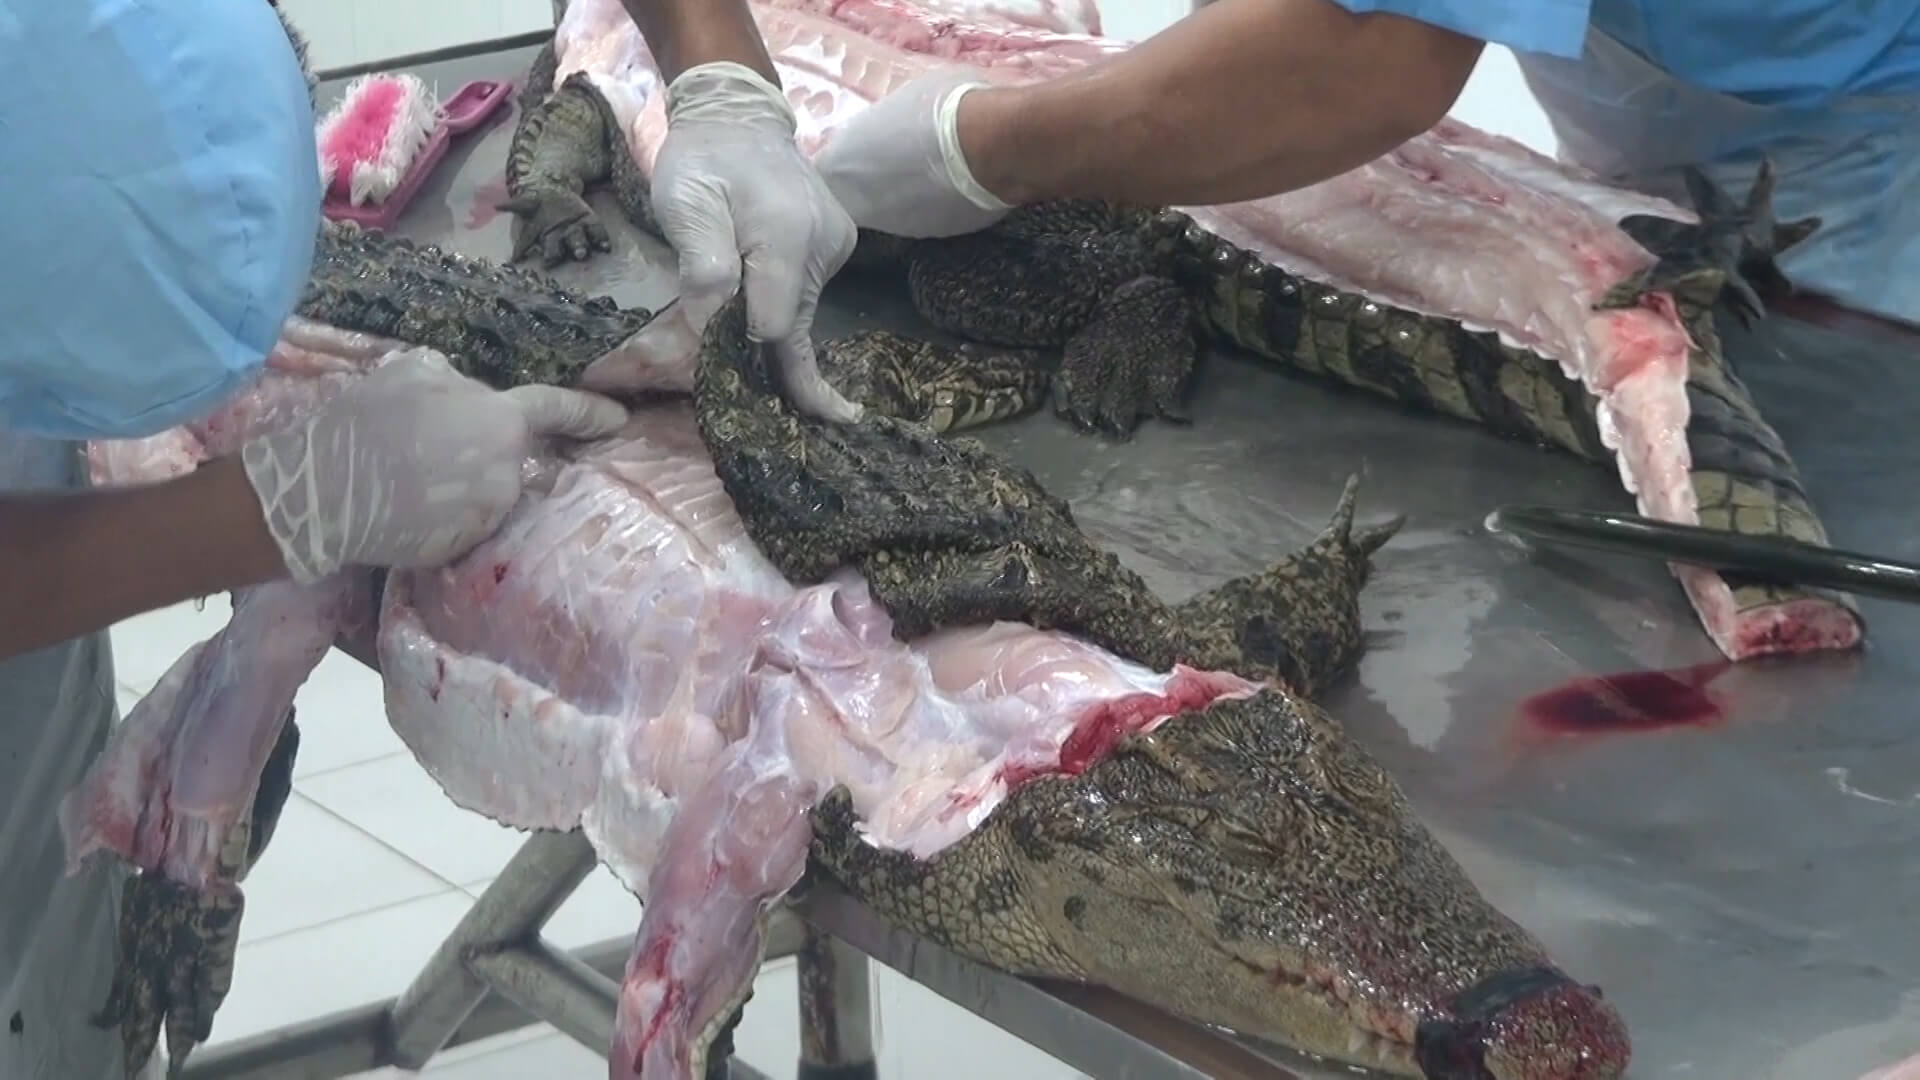 A crocodile slaughtered for their skin in Vietnam.